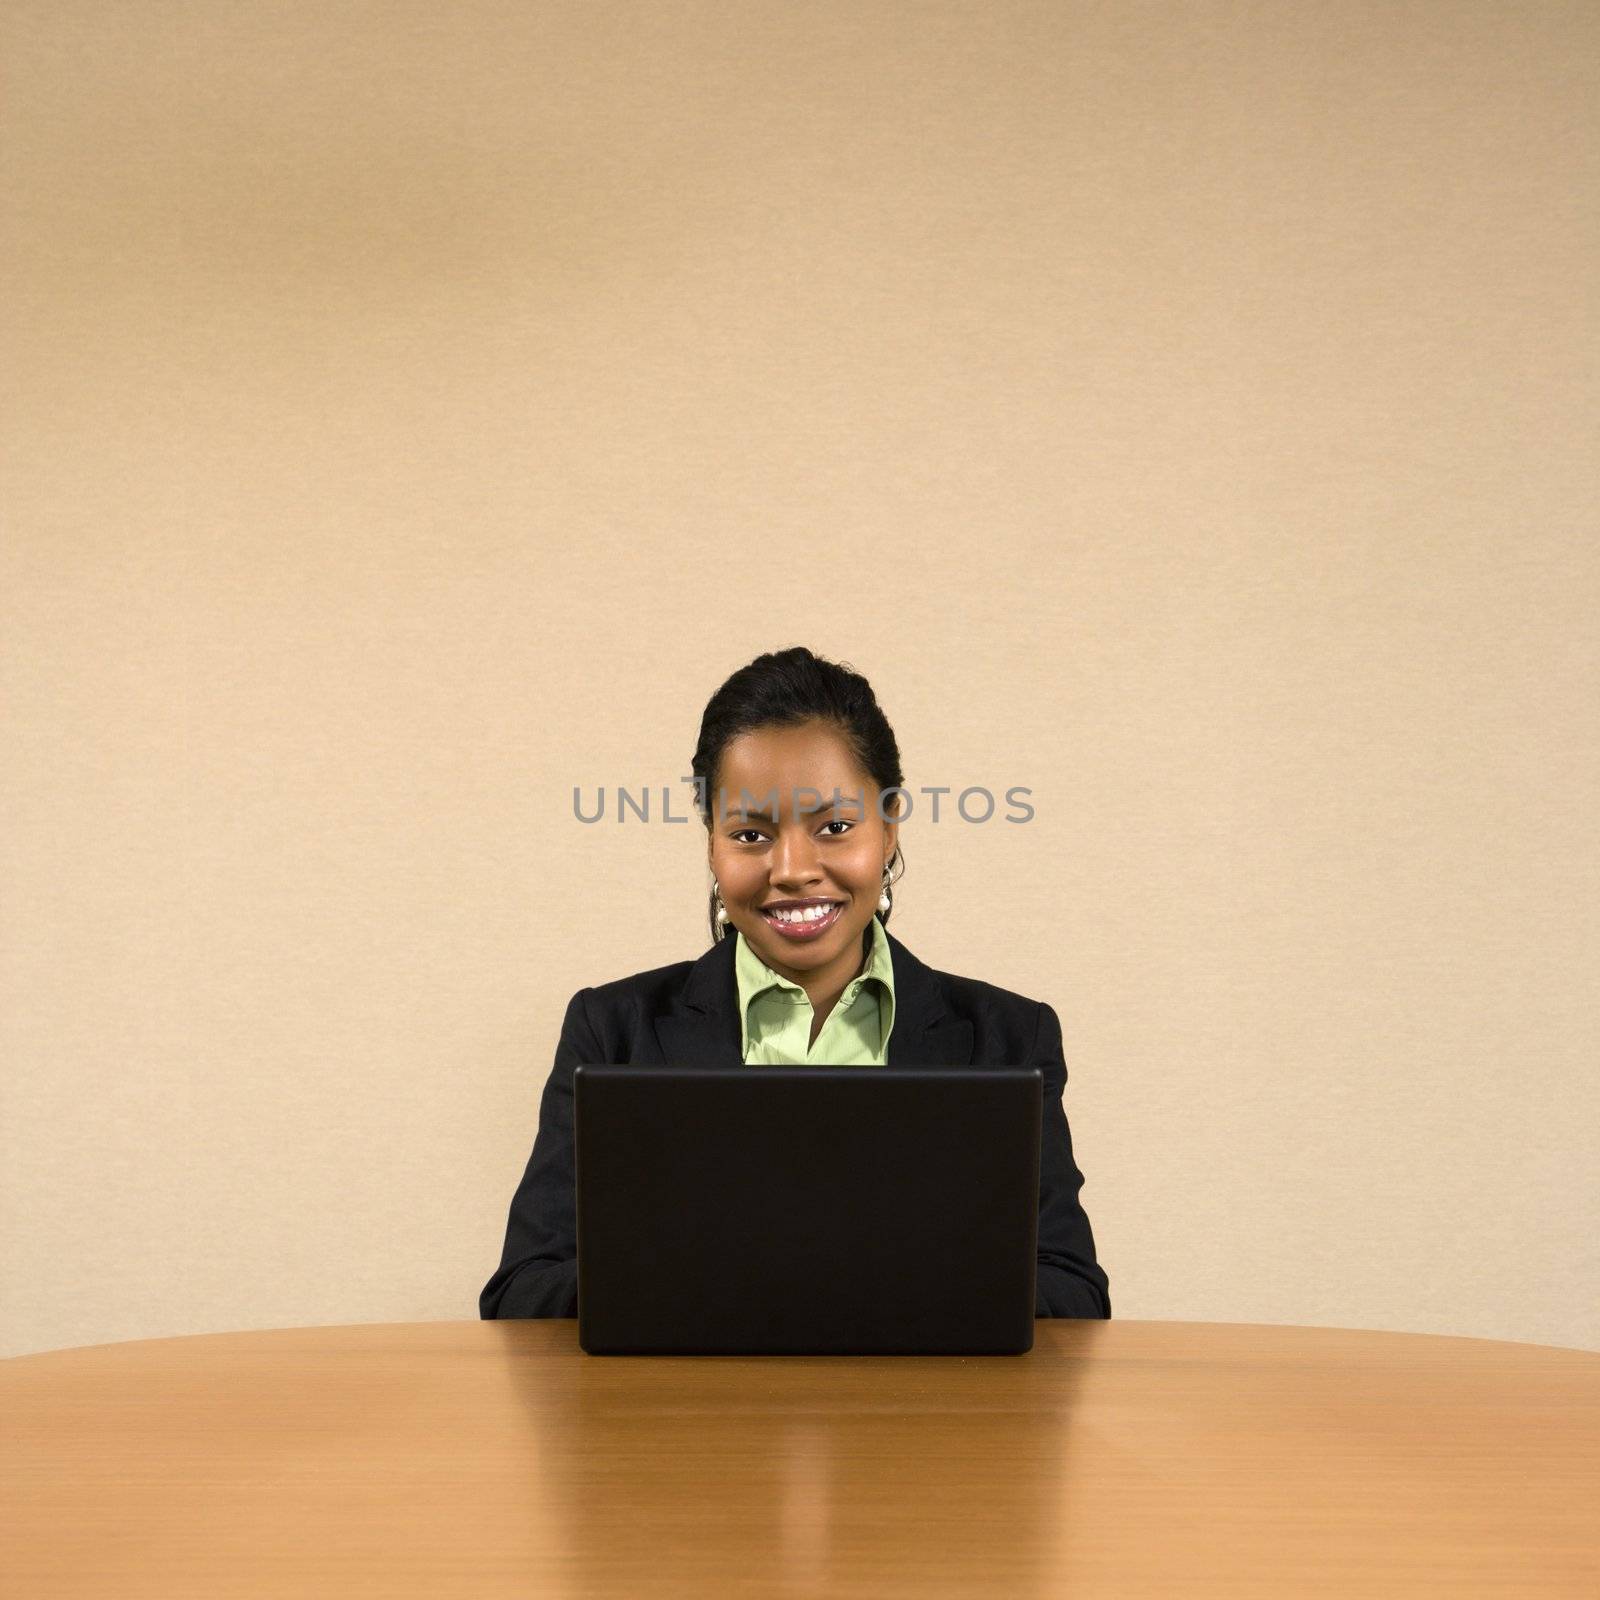 Businesswoman on computer. by iofoto